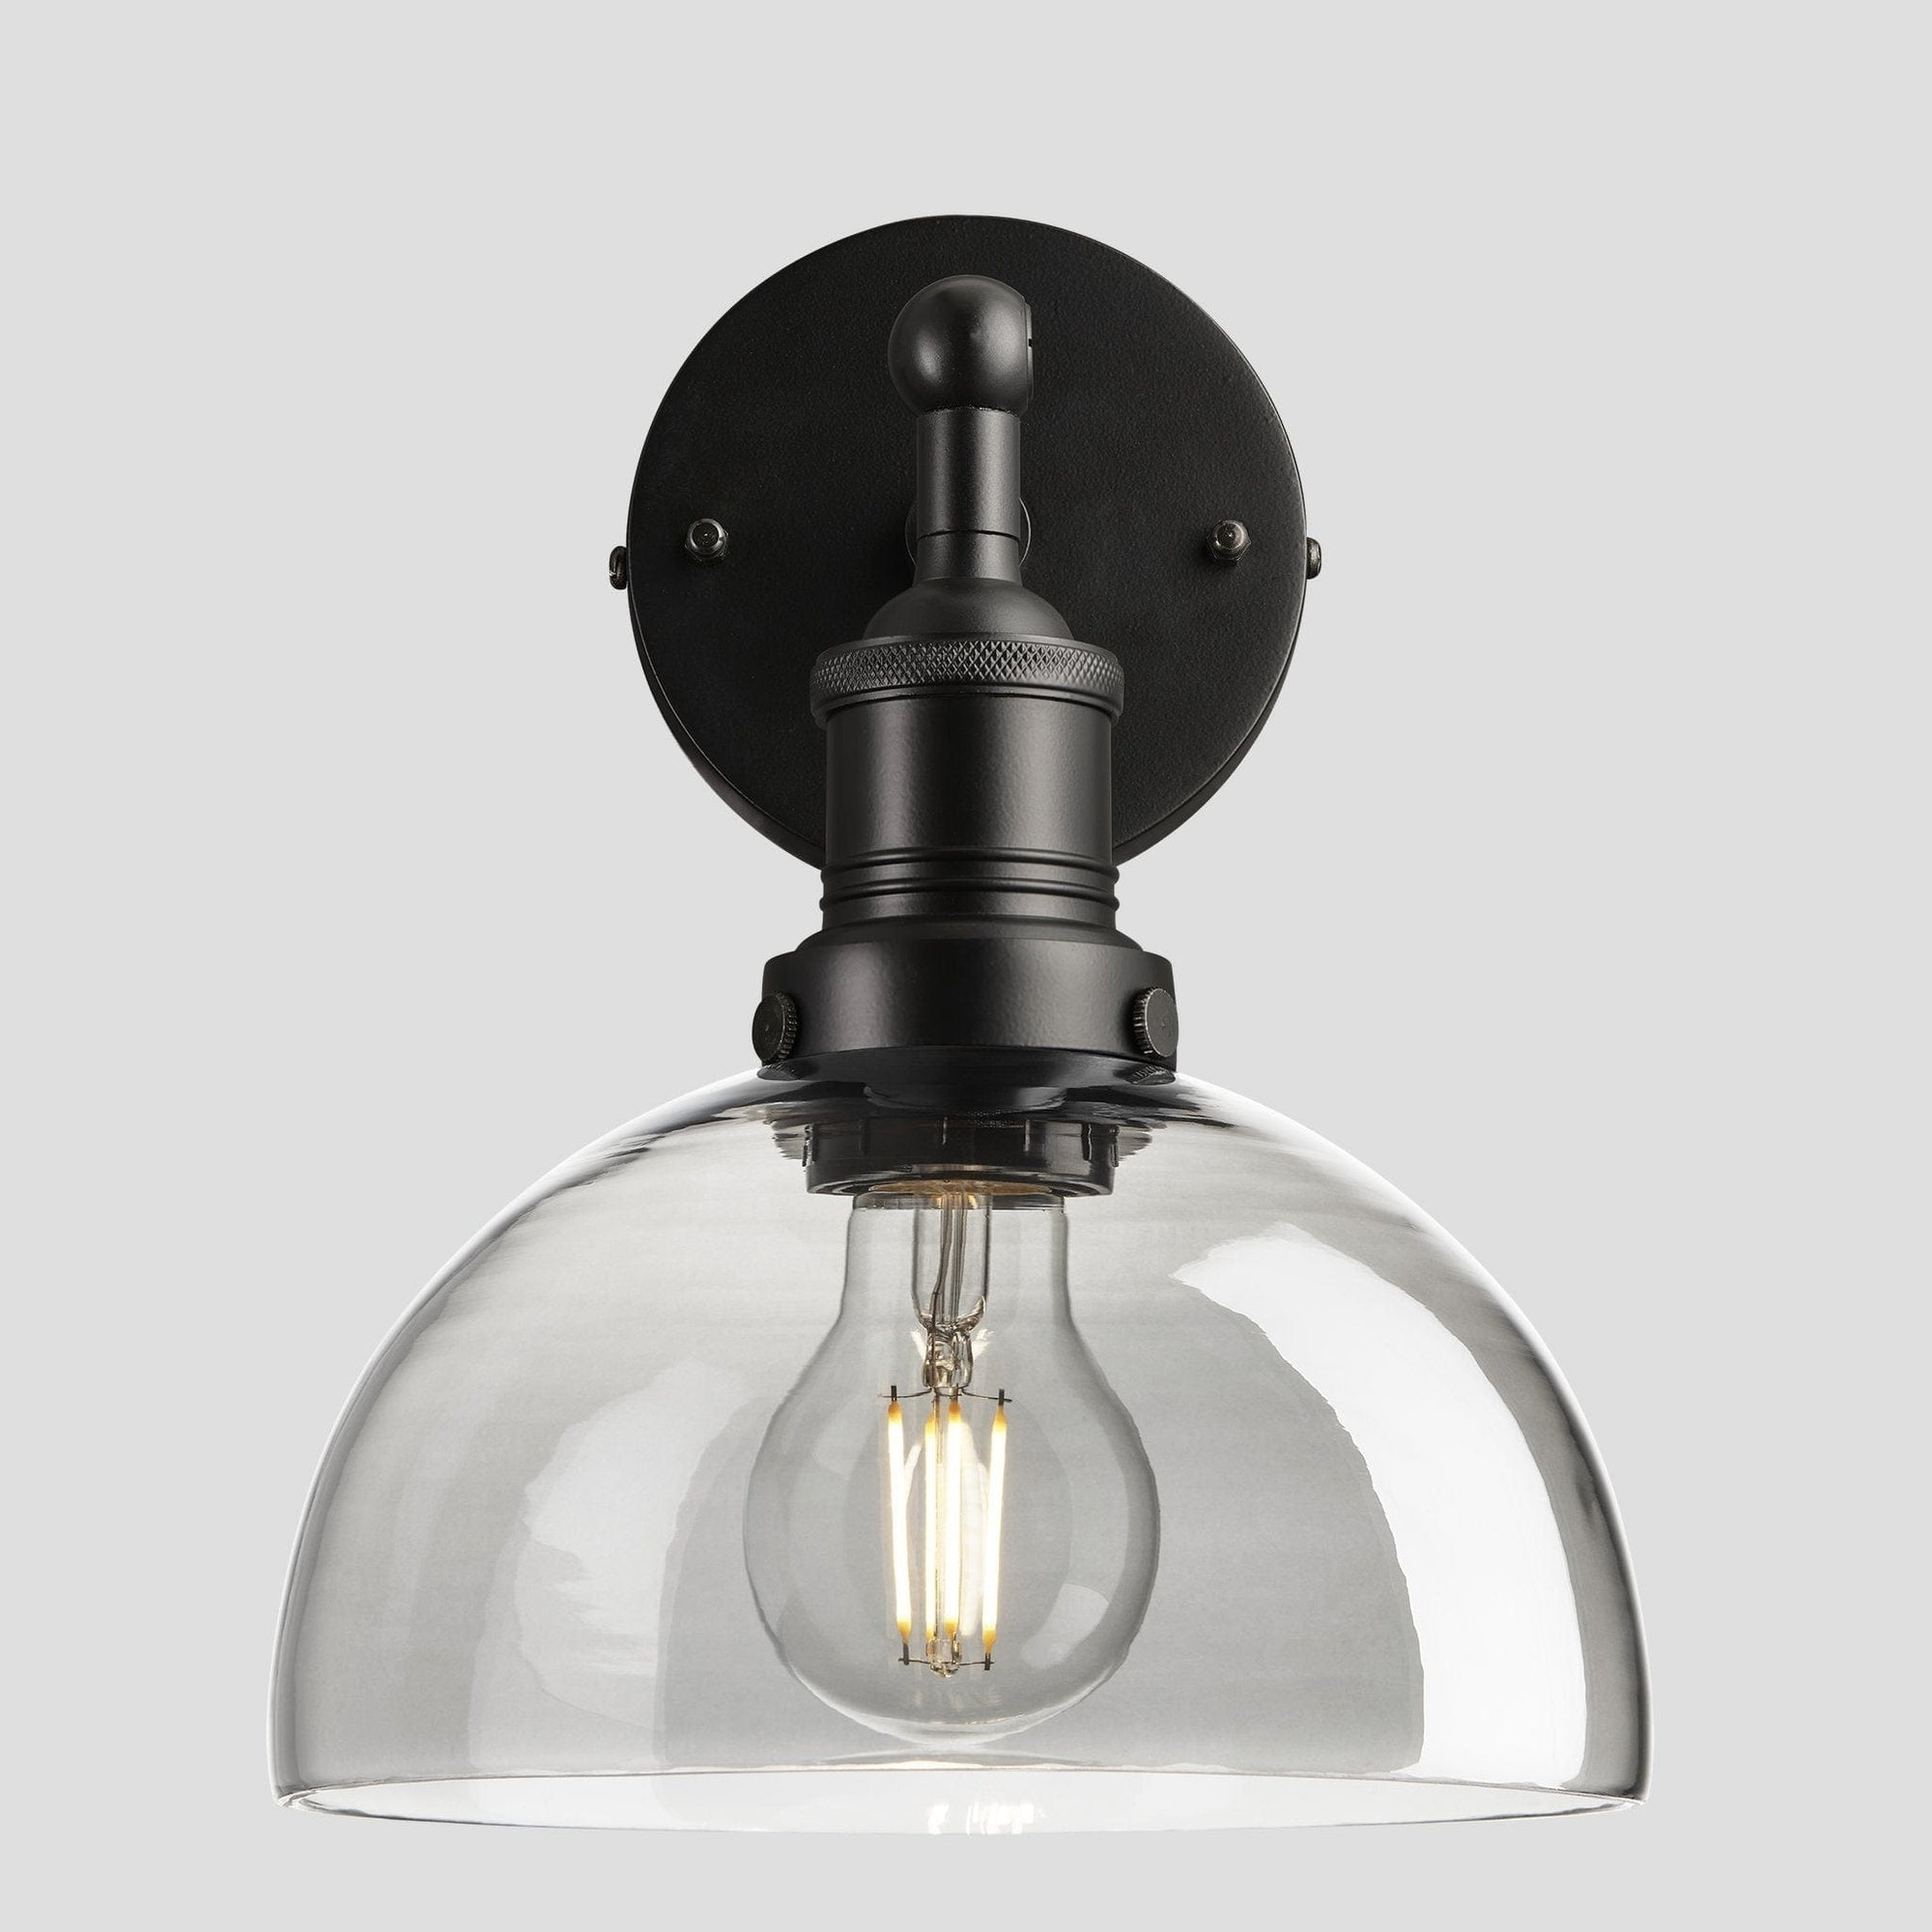 Brooklyn Tinted Glass Dome Wall Light - 8 Inch - Smoke Grey Industville